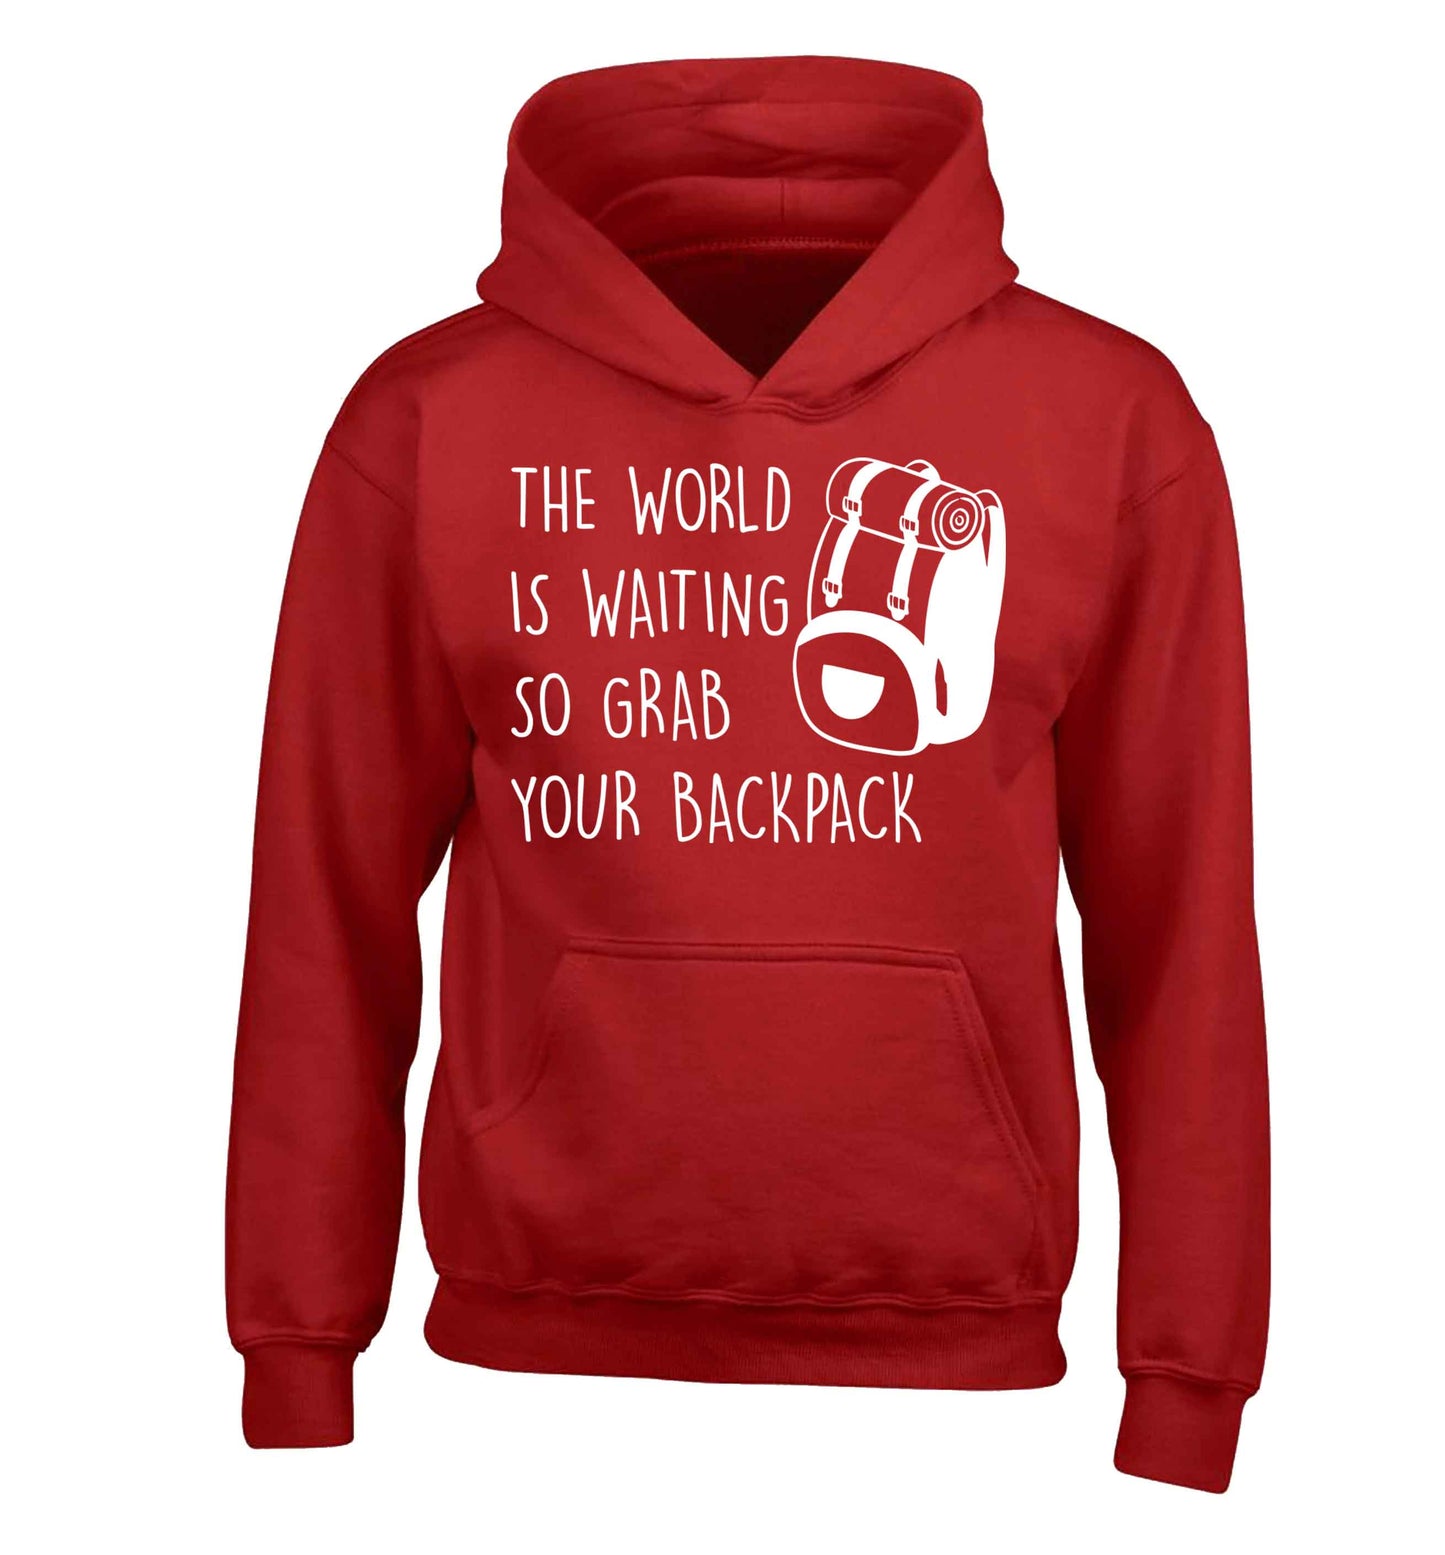 The world is waiting so grab your backpack children's red hoodie 12-13 Years